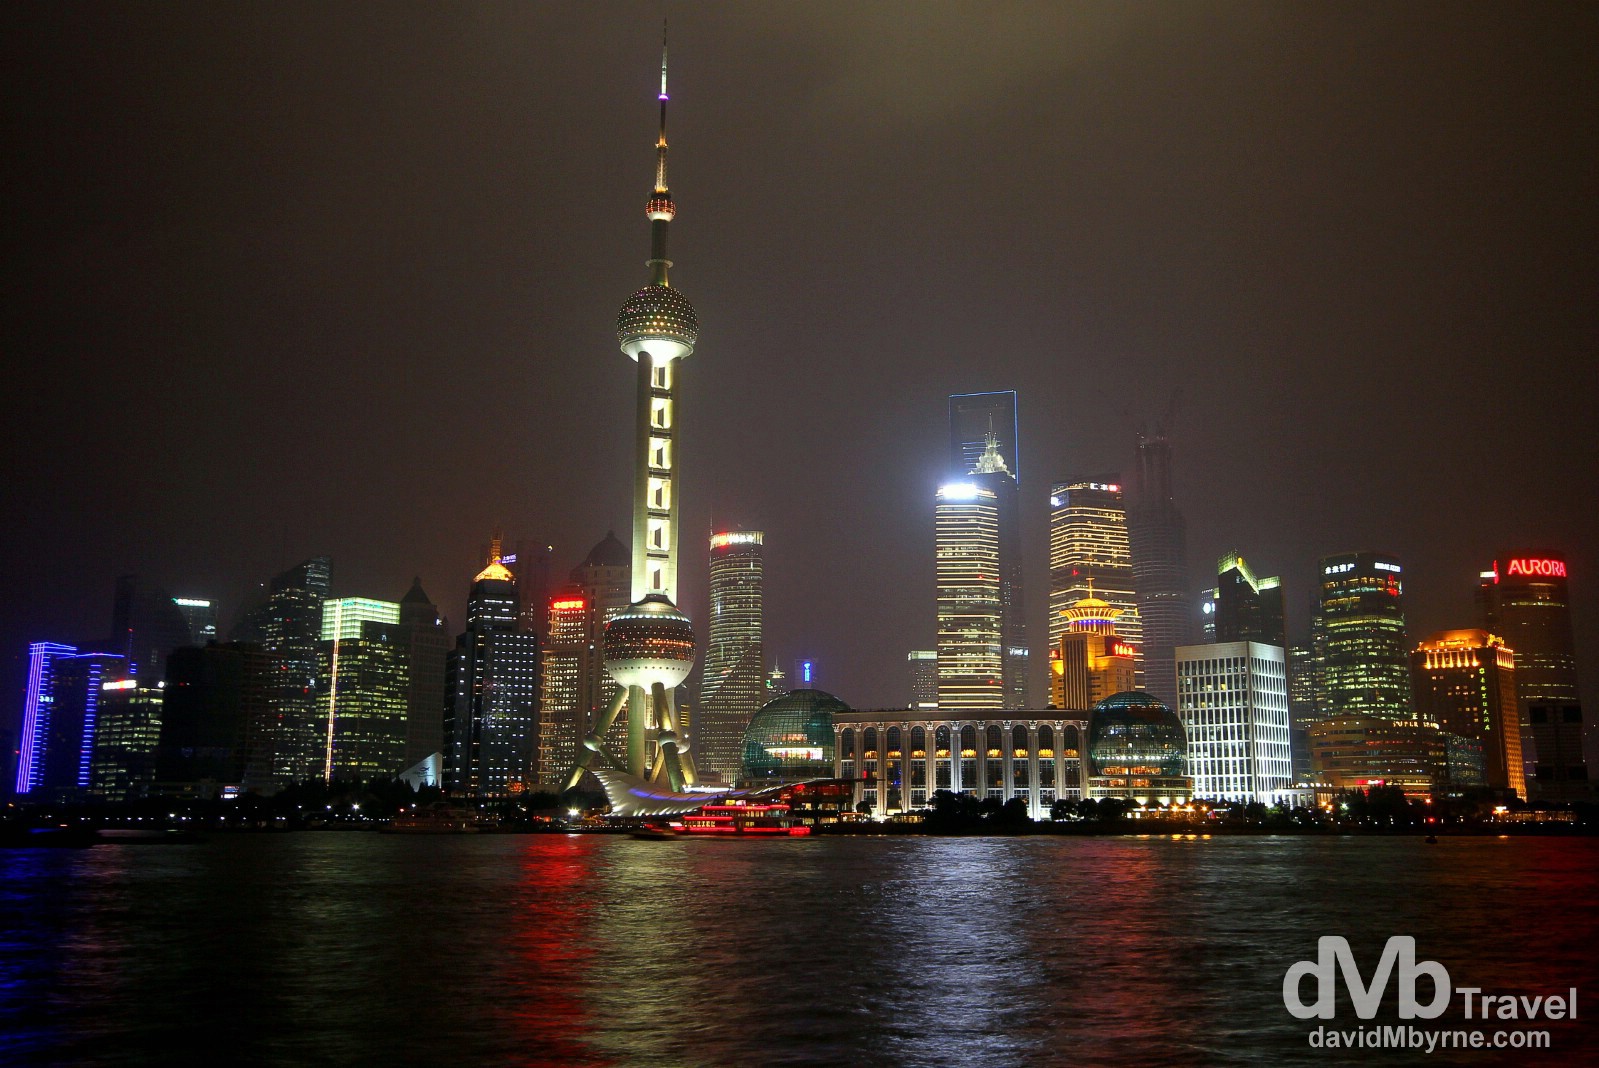 The new Pudong skyline on a dreary October night as seen from the Bund across the Huangpu River. Shanghai, China. October 22nd 2012. 